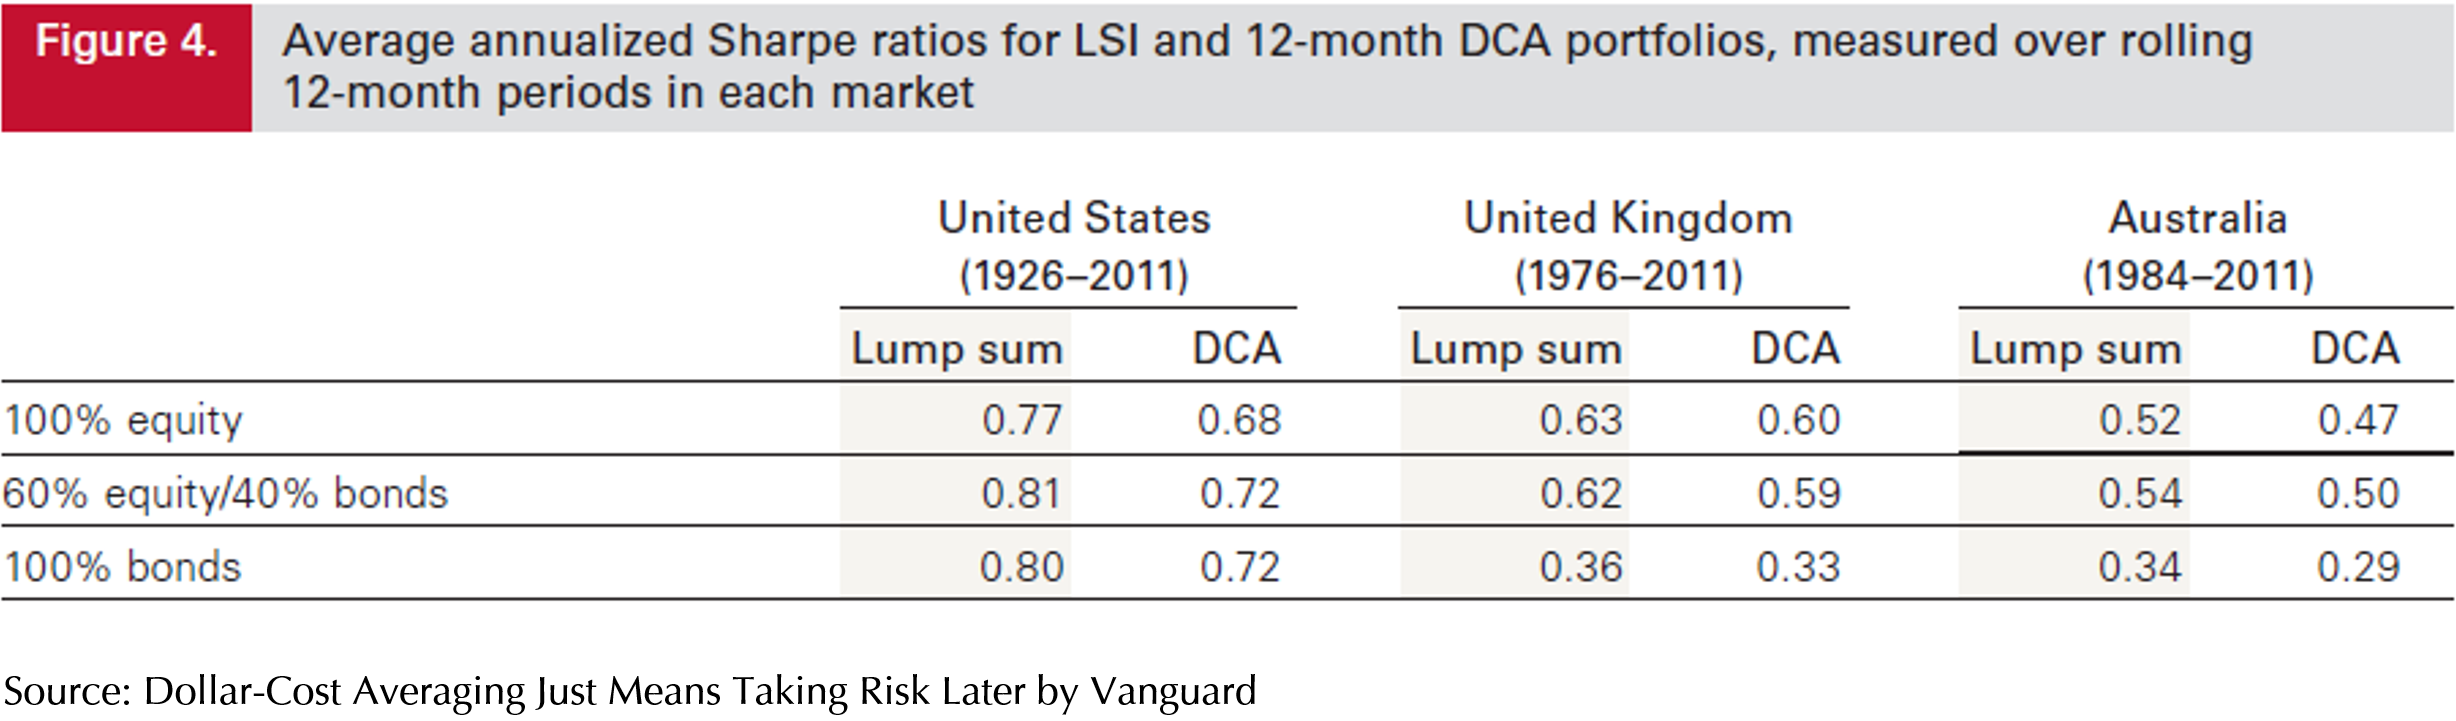 lump-sum-investing-vs-dca-is-there-a-clear-winner-chart-3